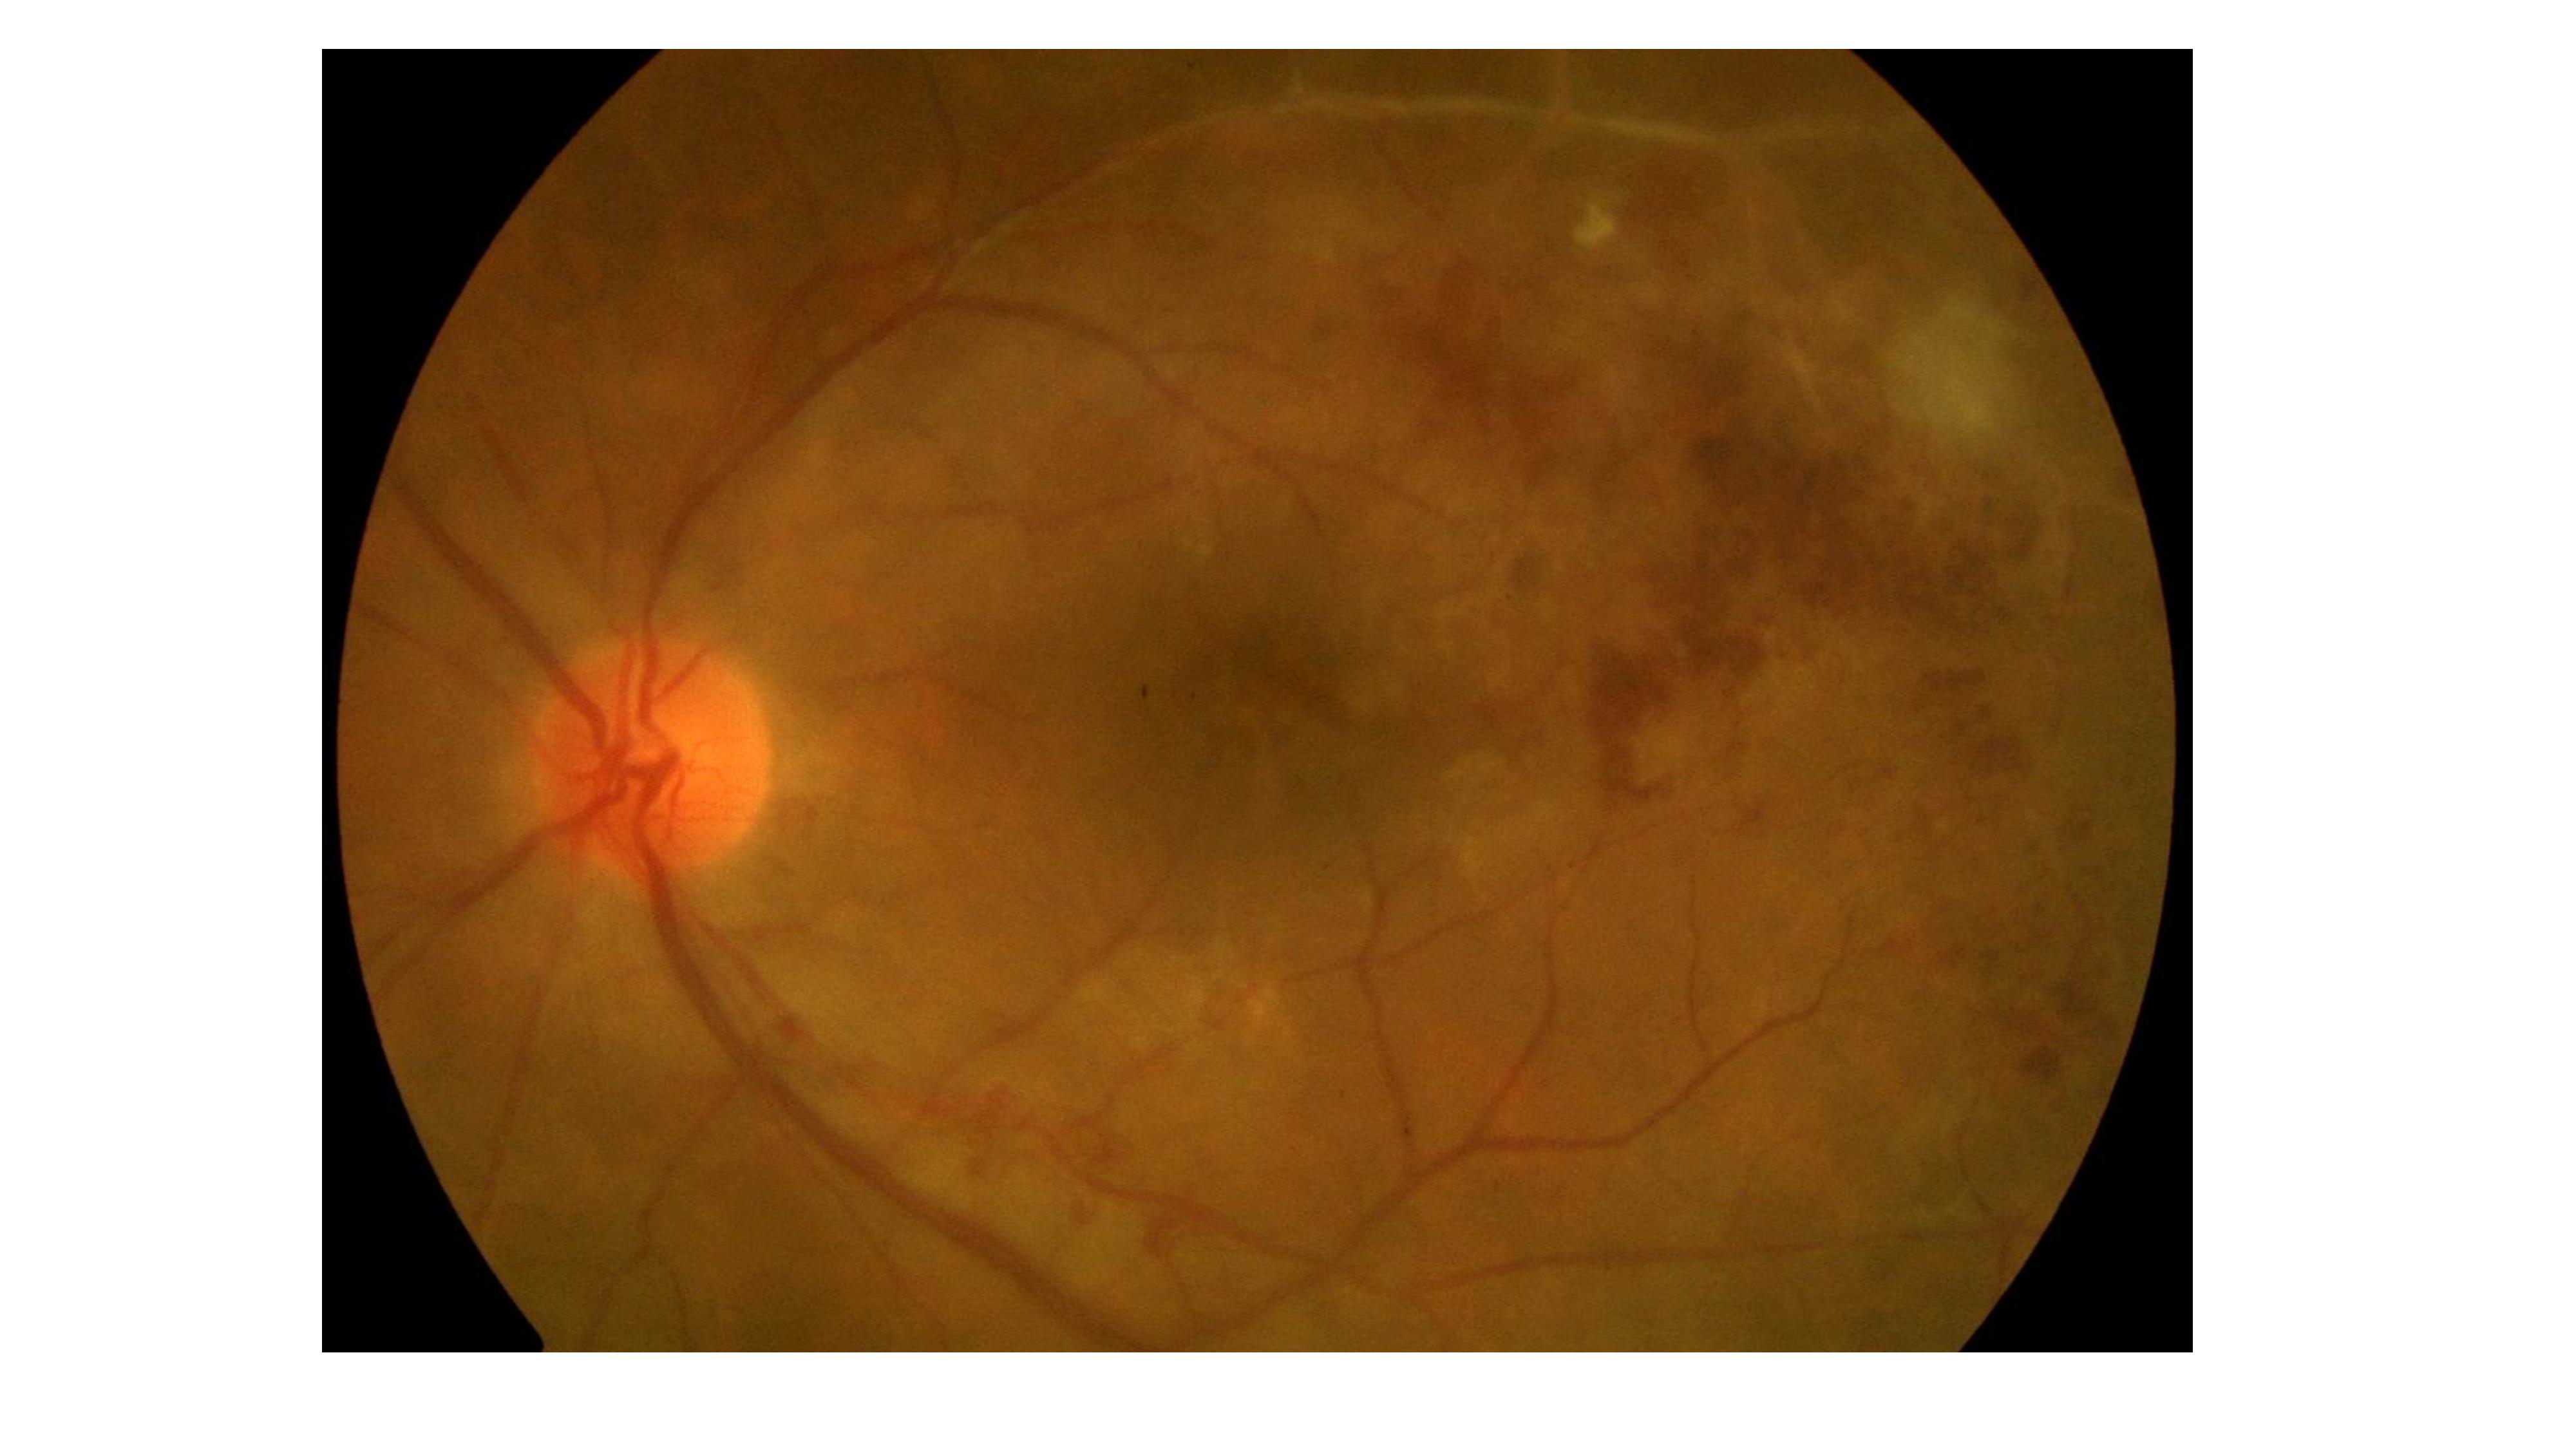 TB delayed hypersensitivity uveitis (Eales’ disease) presenting with hemorrhagic ischemic vascular occlusion